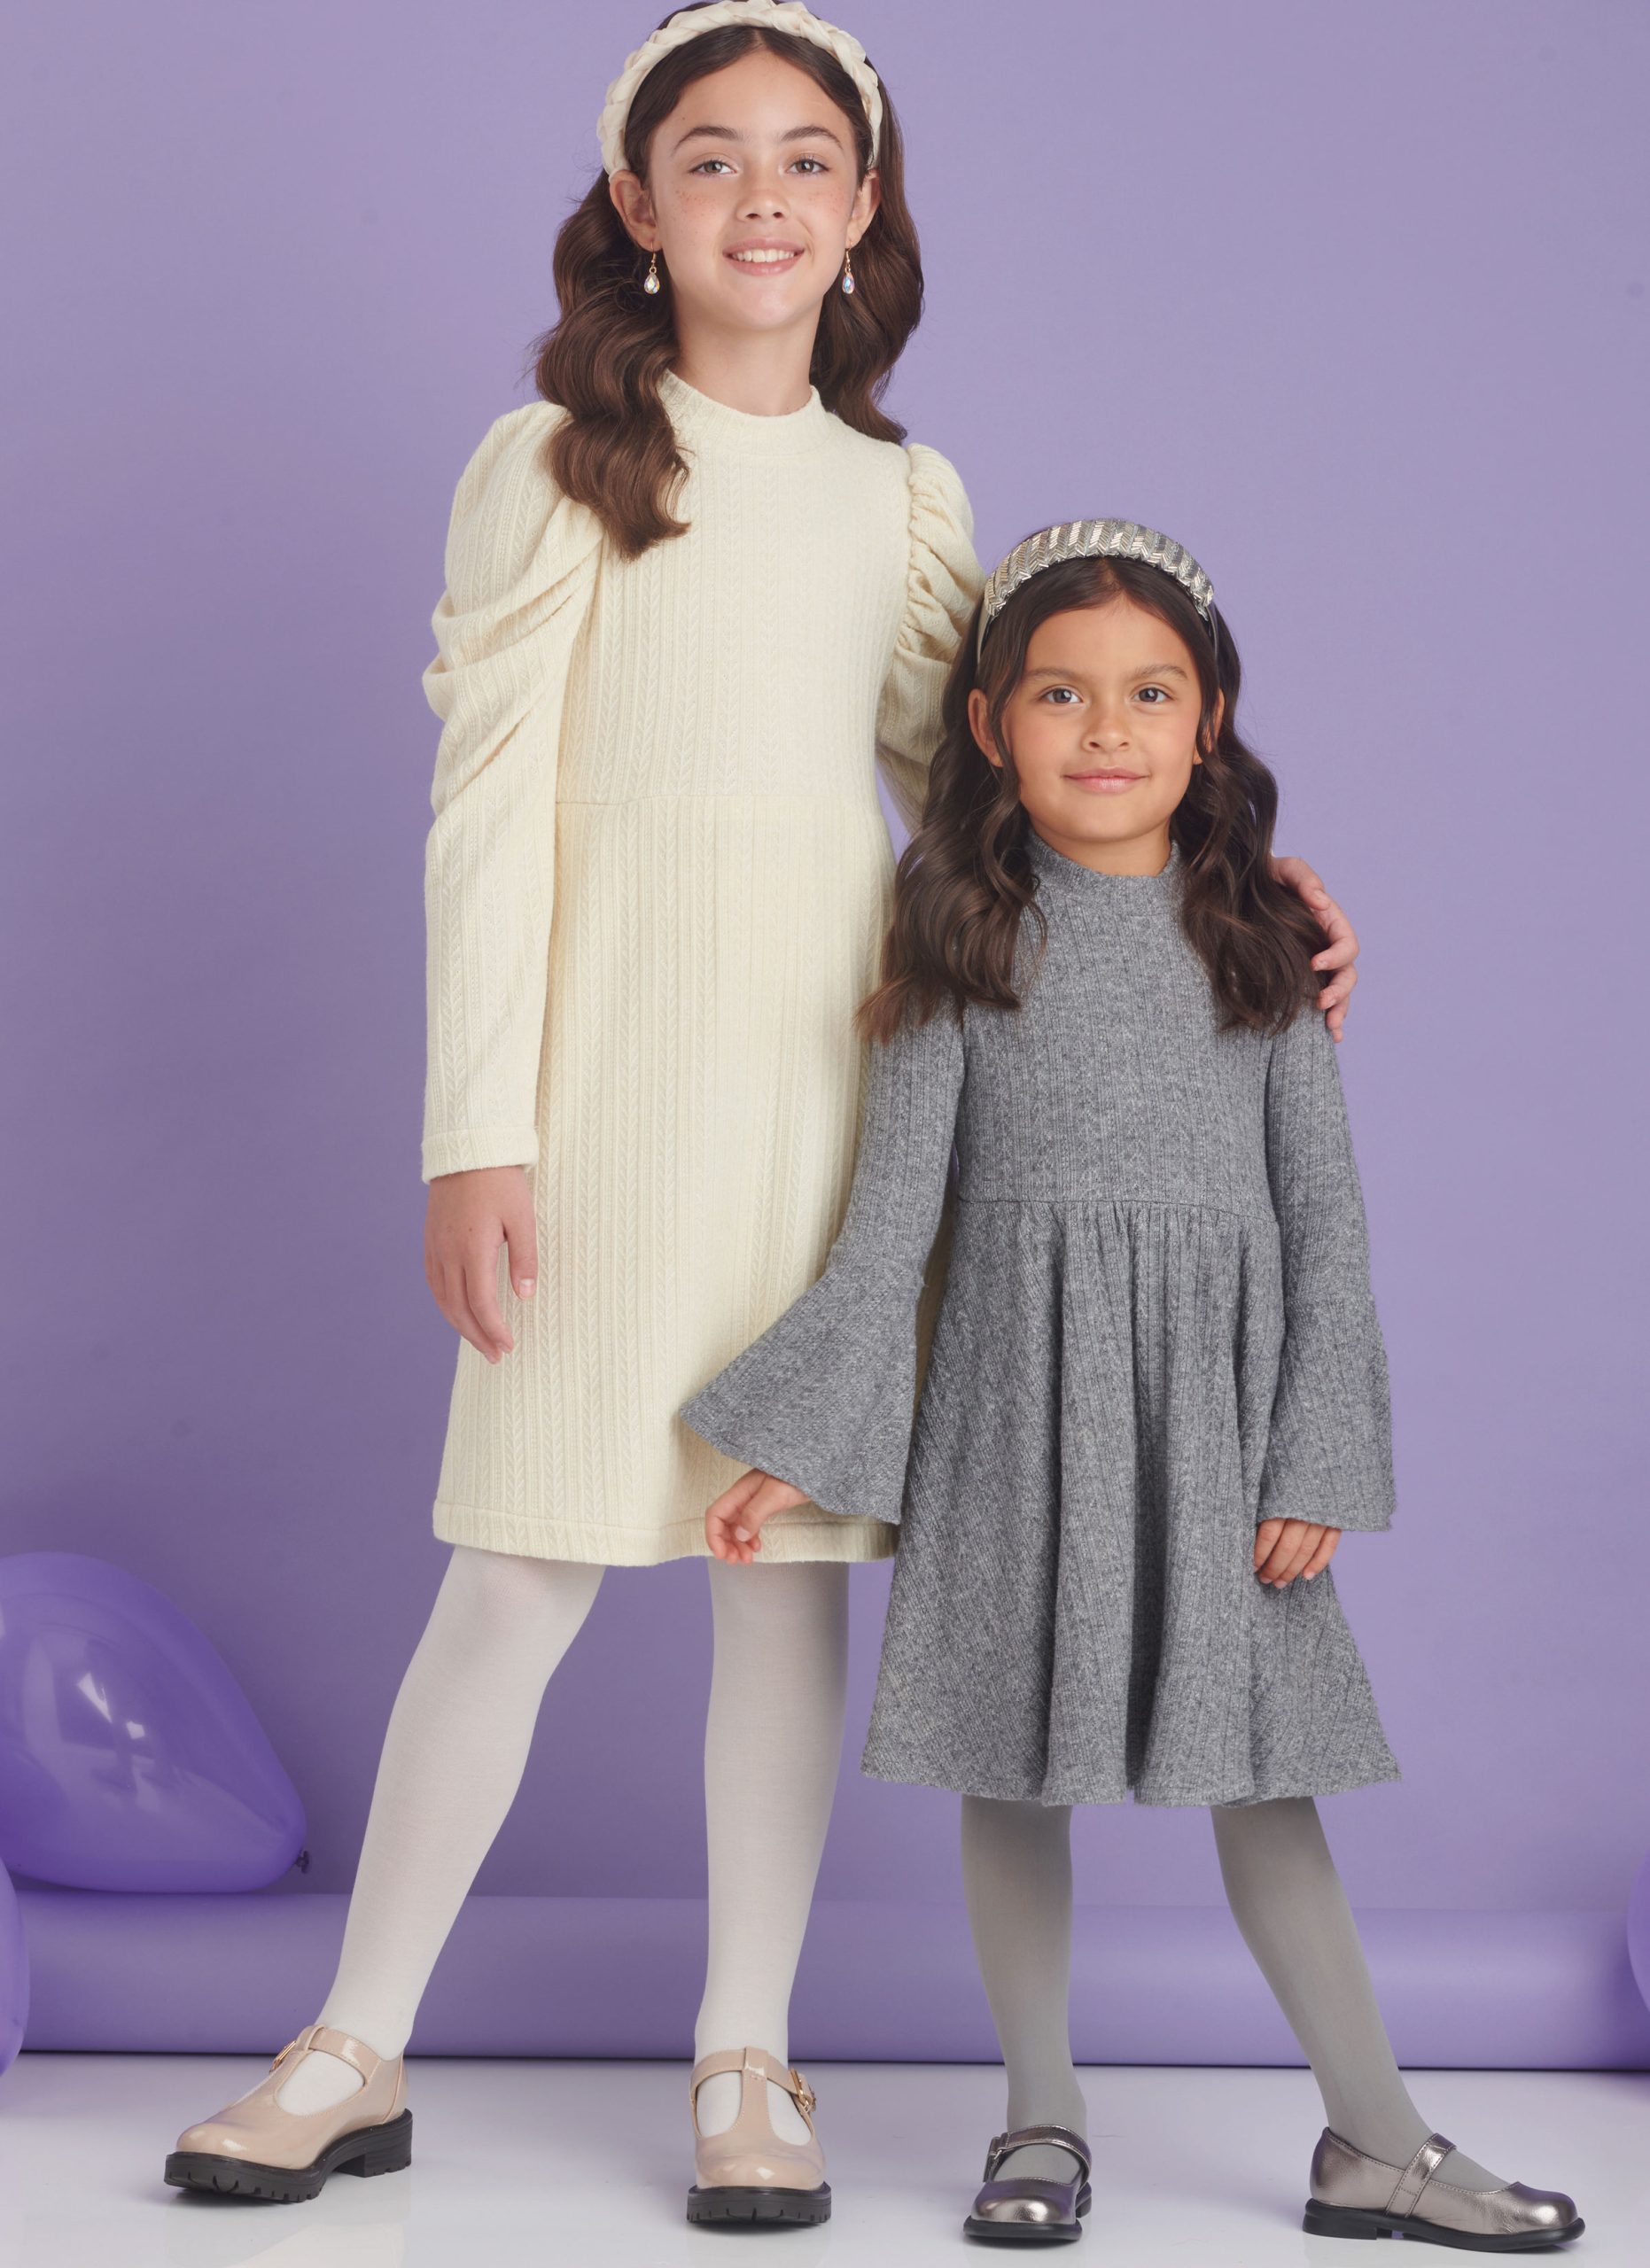 Simplicity Hoodies and Leggings S9637 - The Fold Line